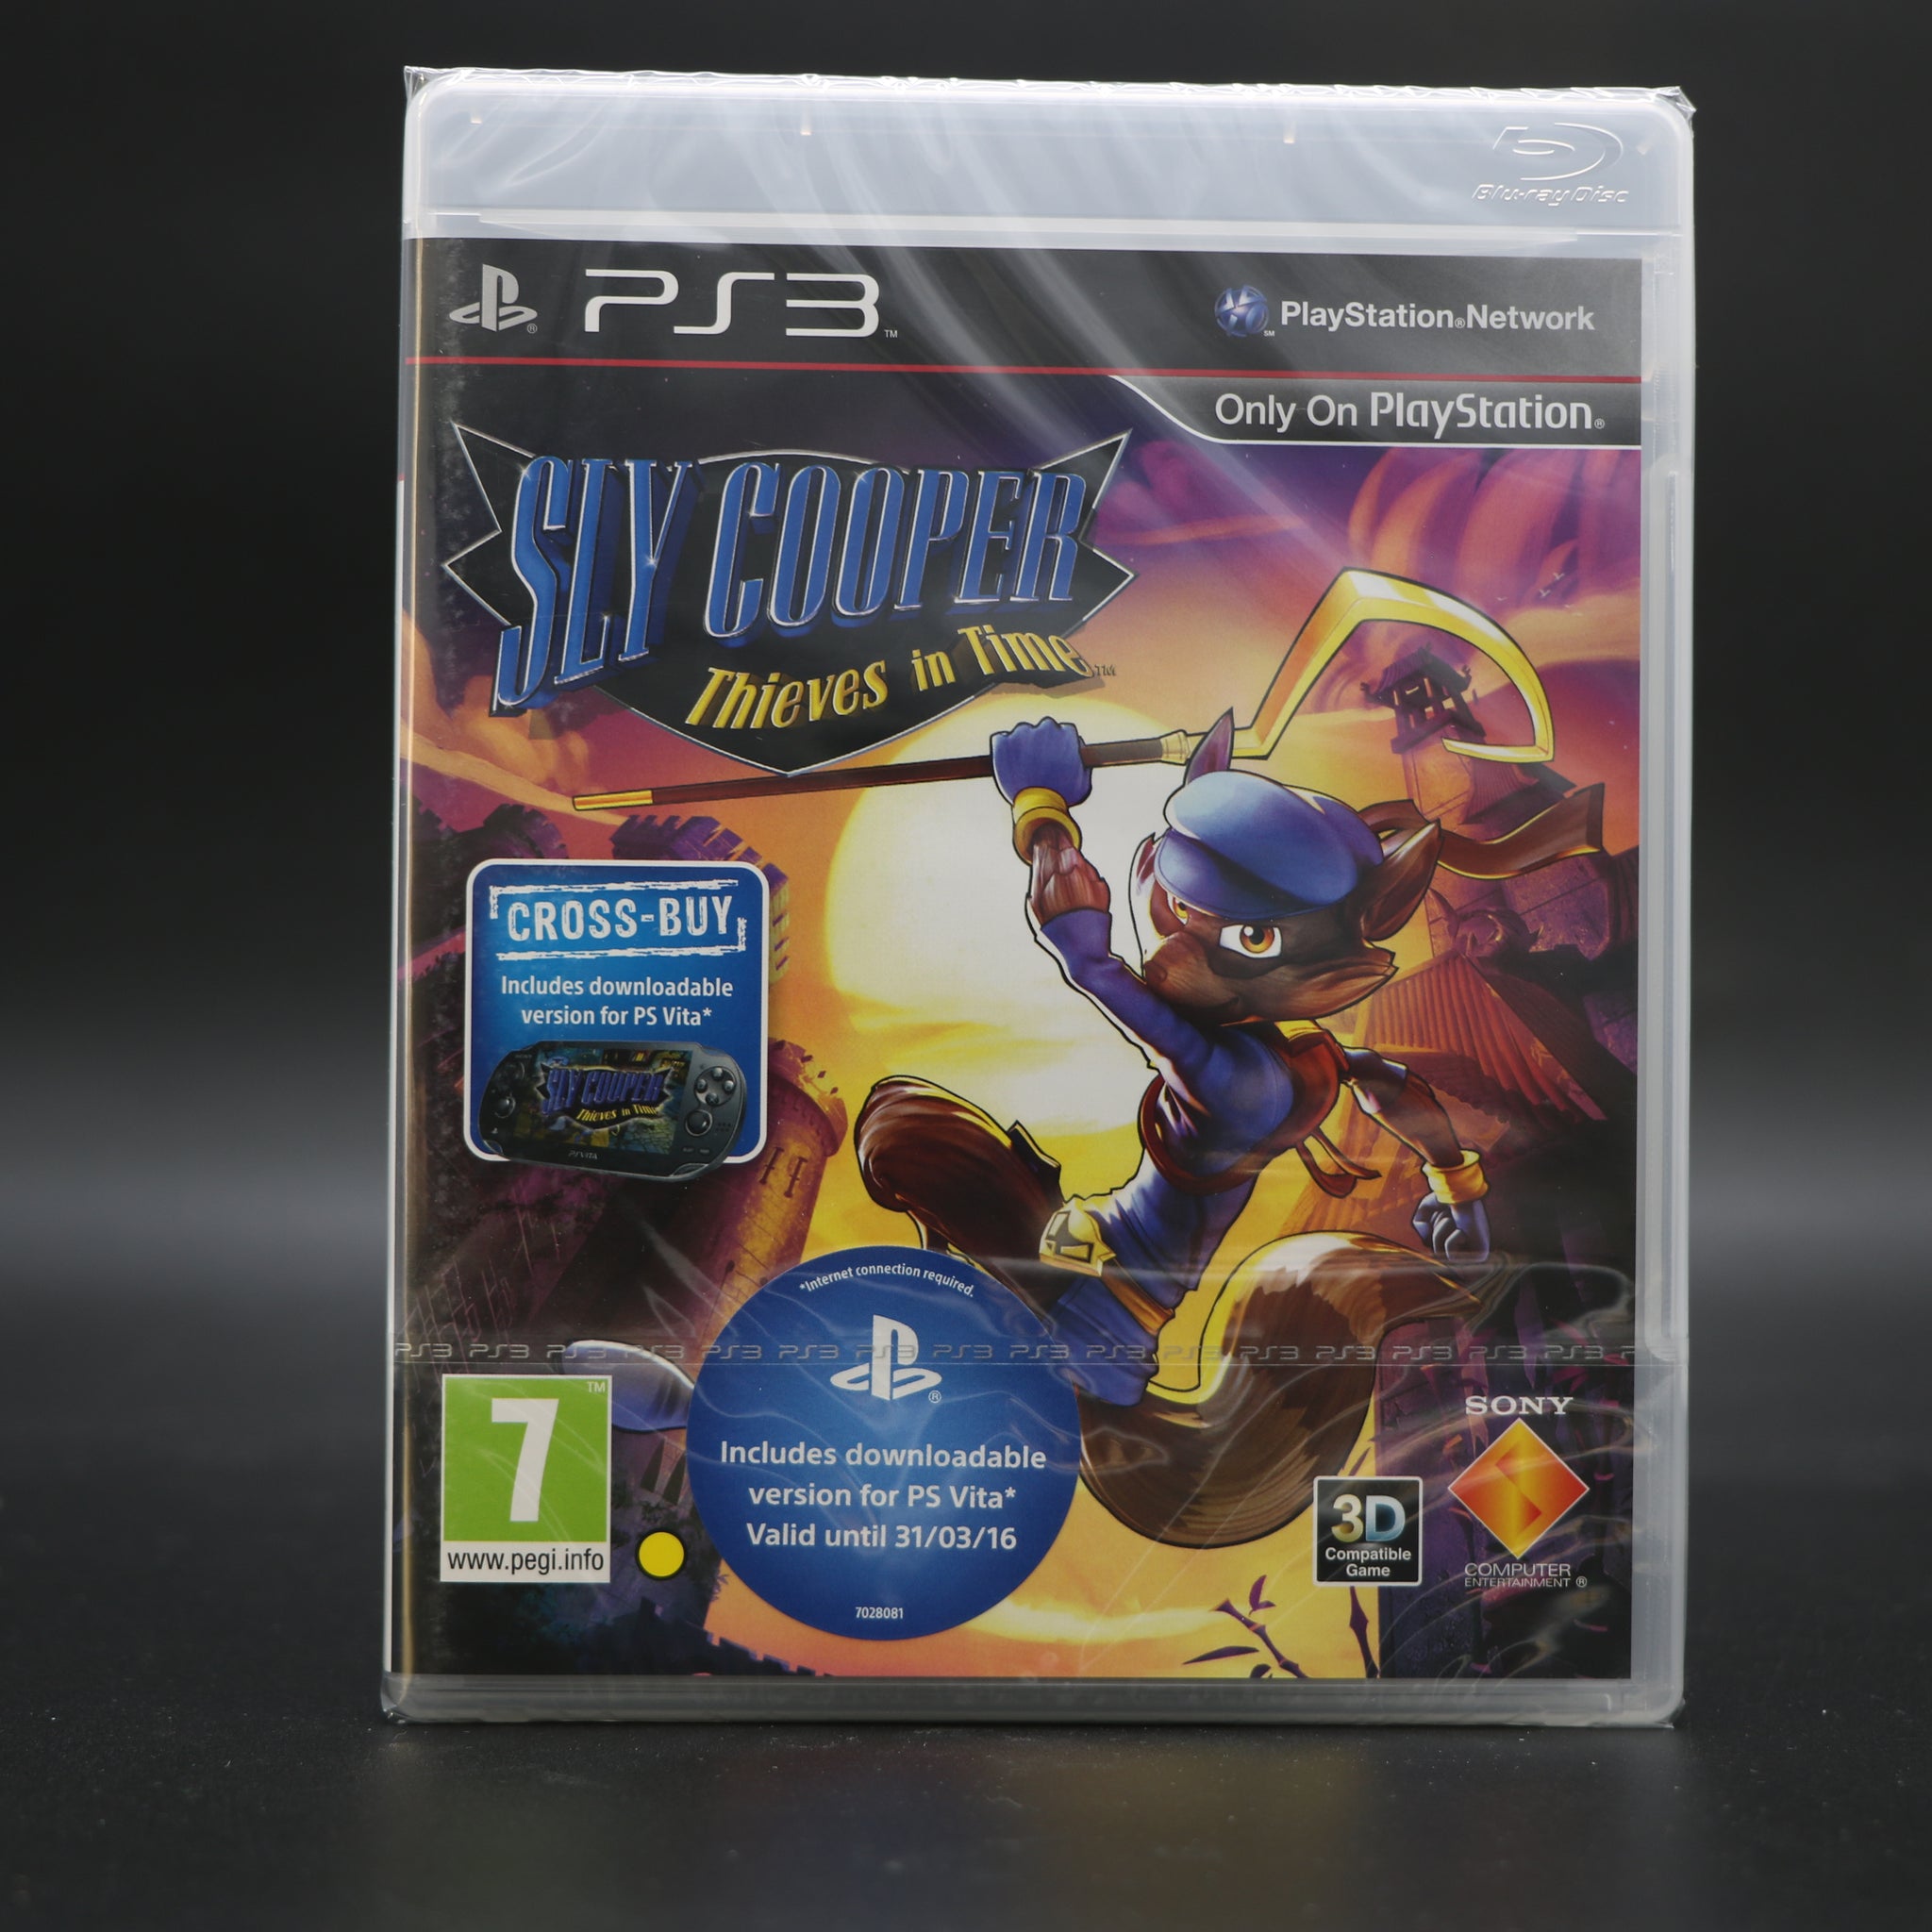 Sly Cooper 5 on PS5 Now Looks Unlikely to Happen